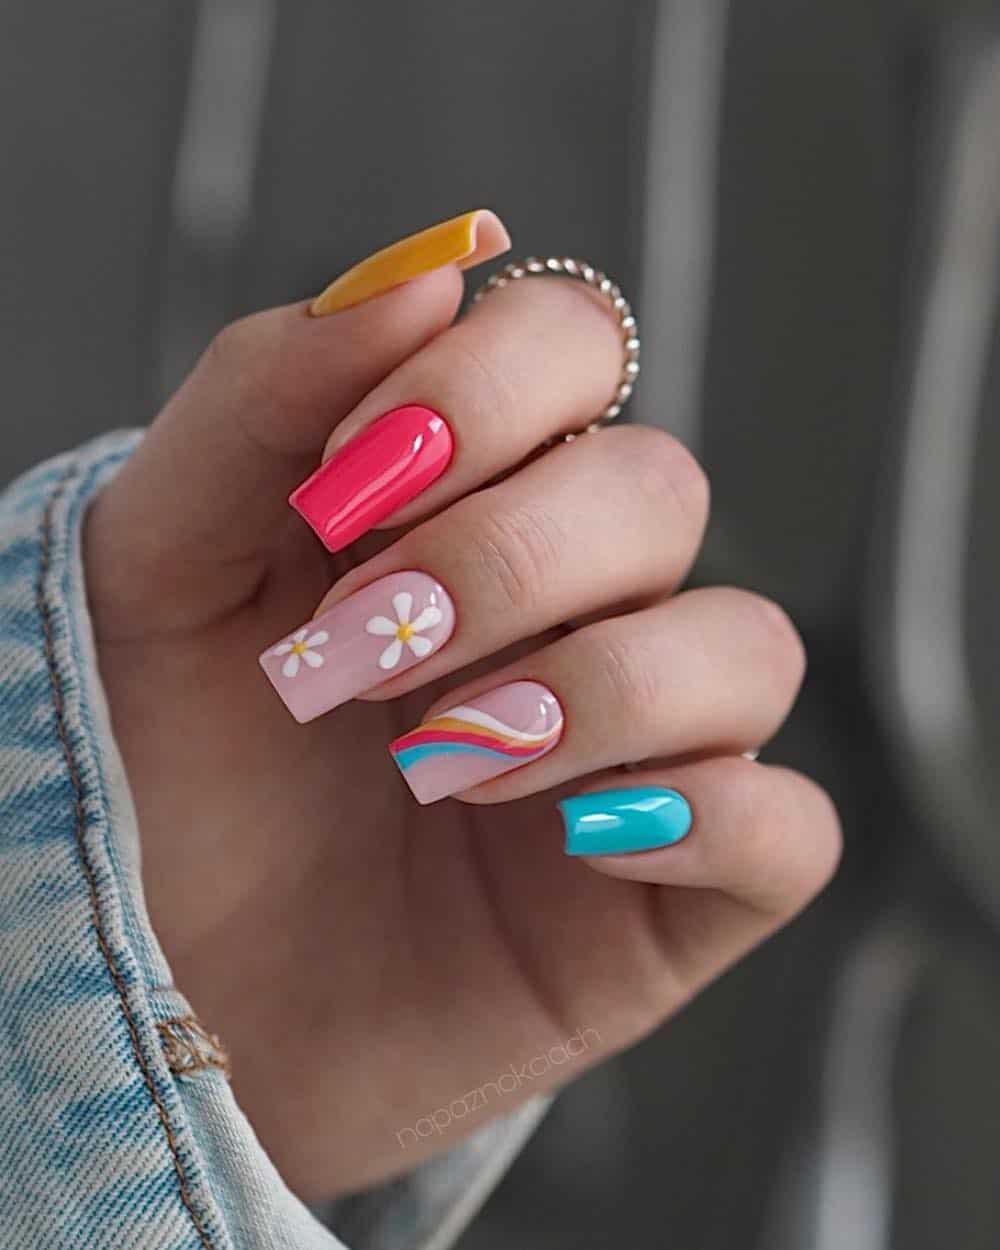 A hand with bright pink, blue, and yellow solid-colored nails with two light pink accent nails featuring rainbow swirls and white flowers